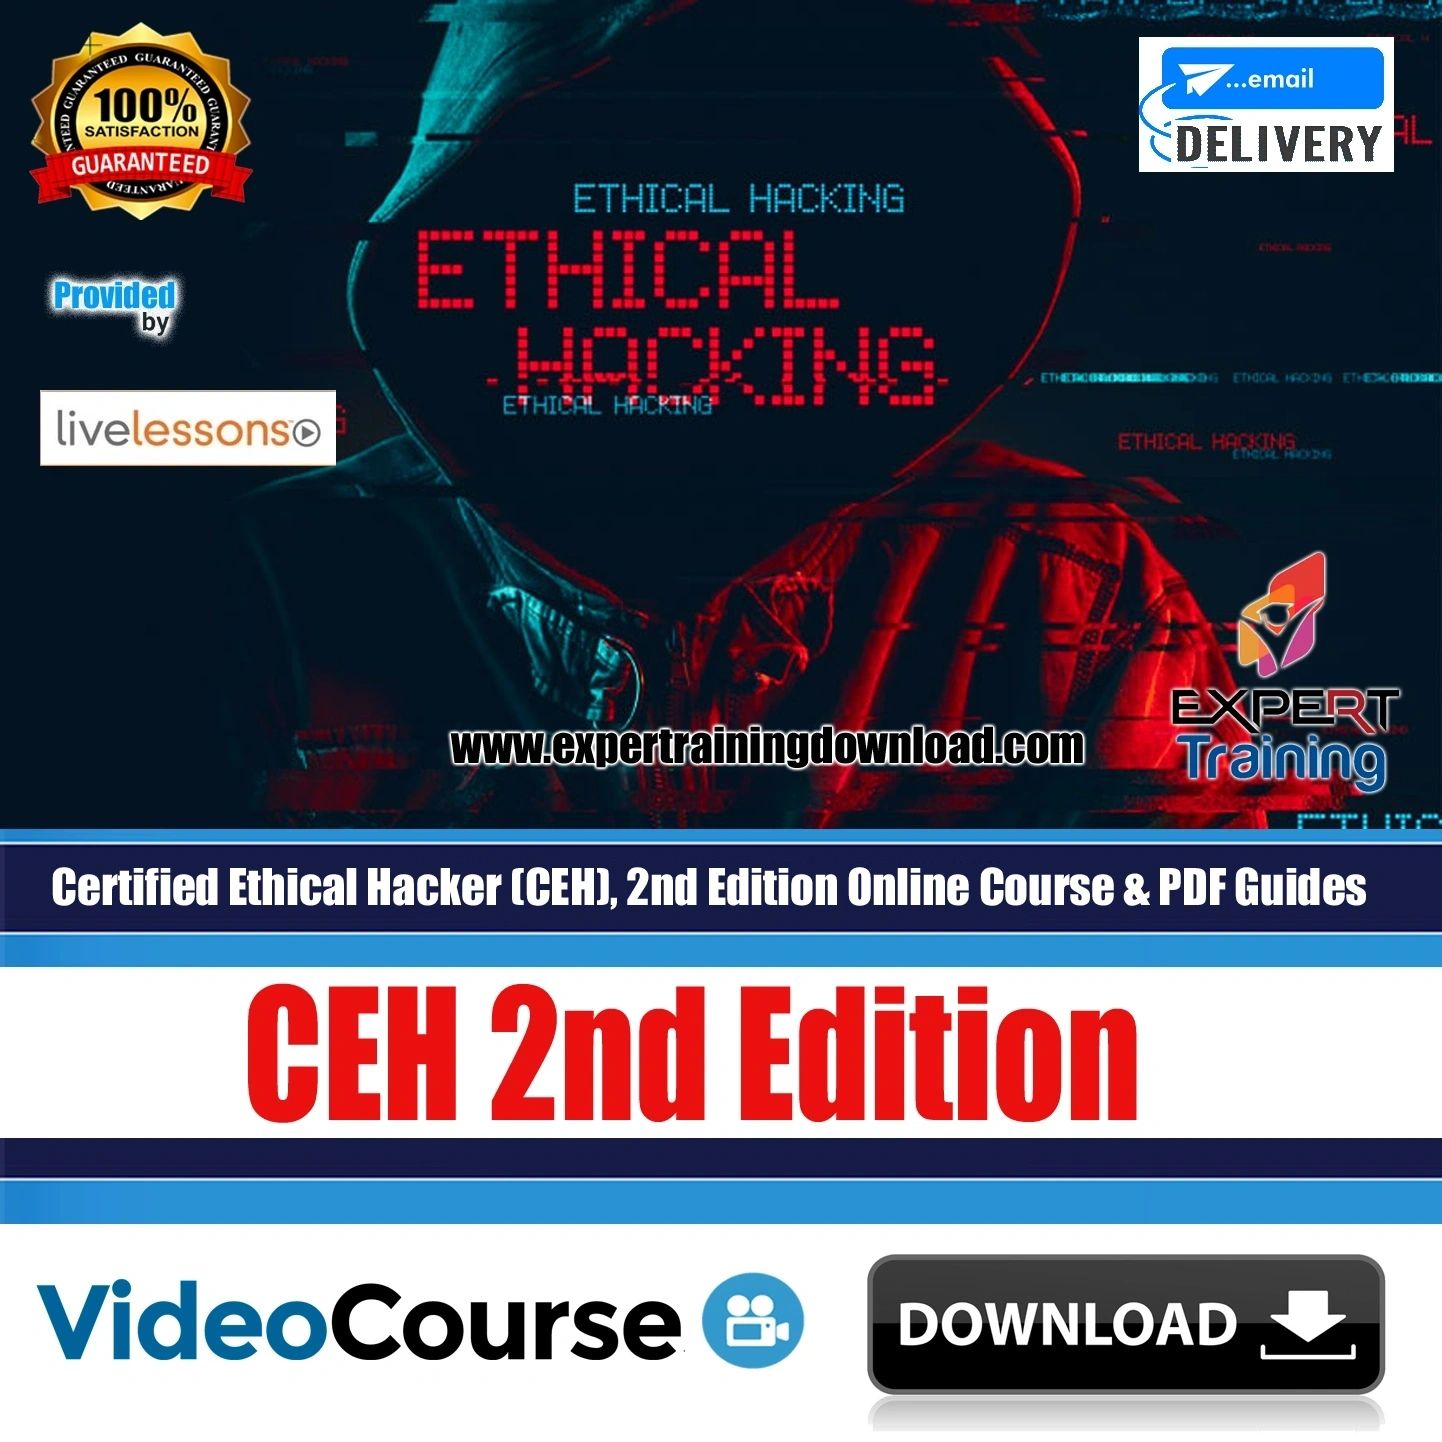 Certified Ethical Hacker (CEH), 2nd Edition Online Course & PDF Guides